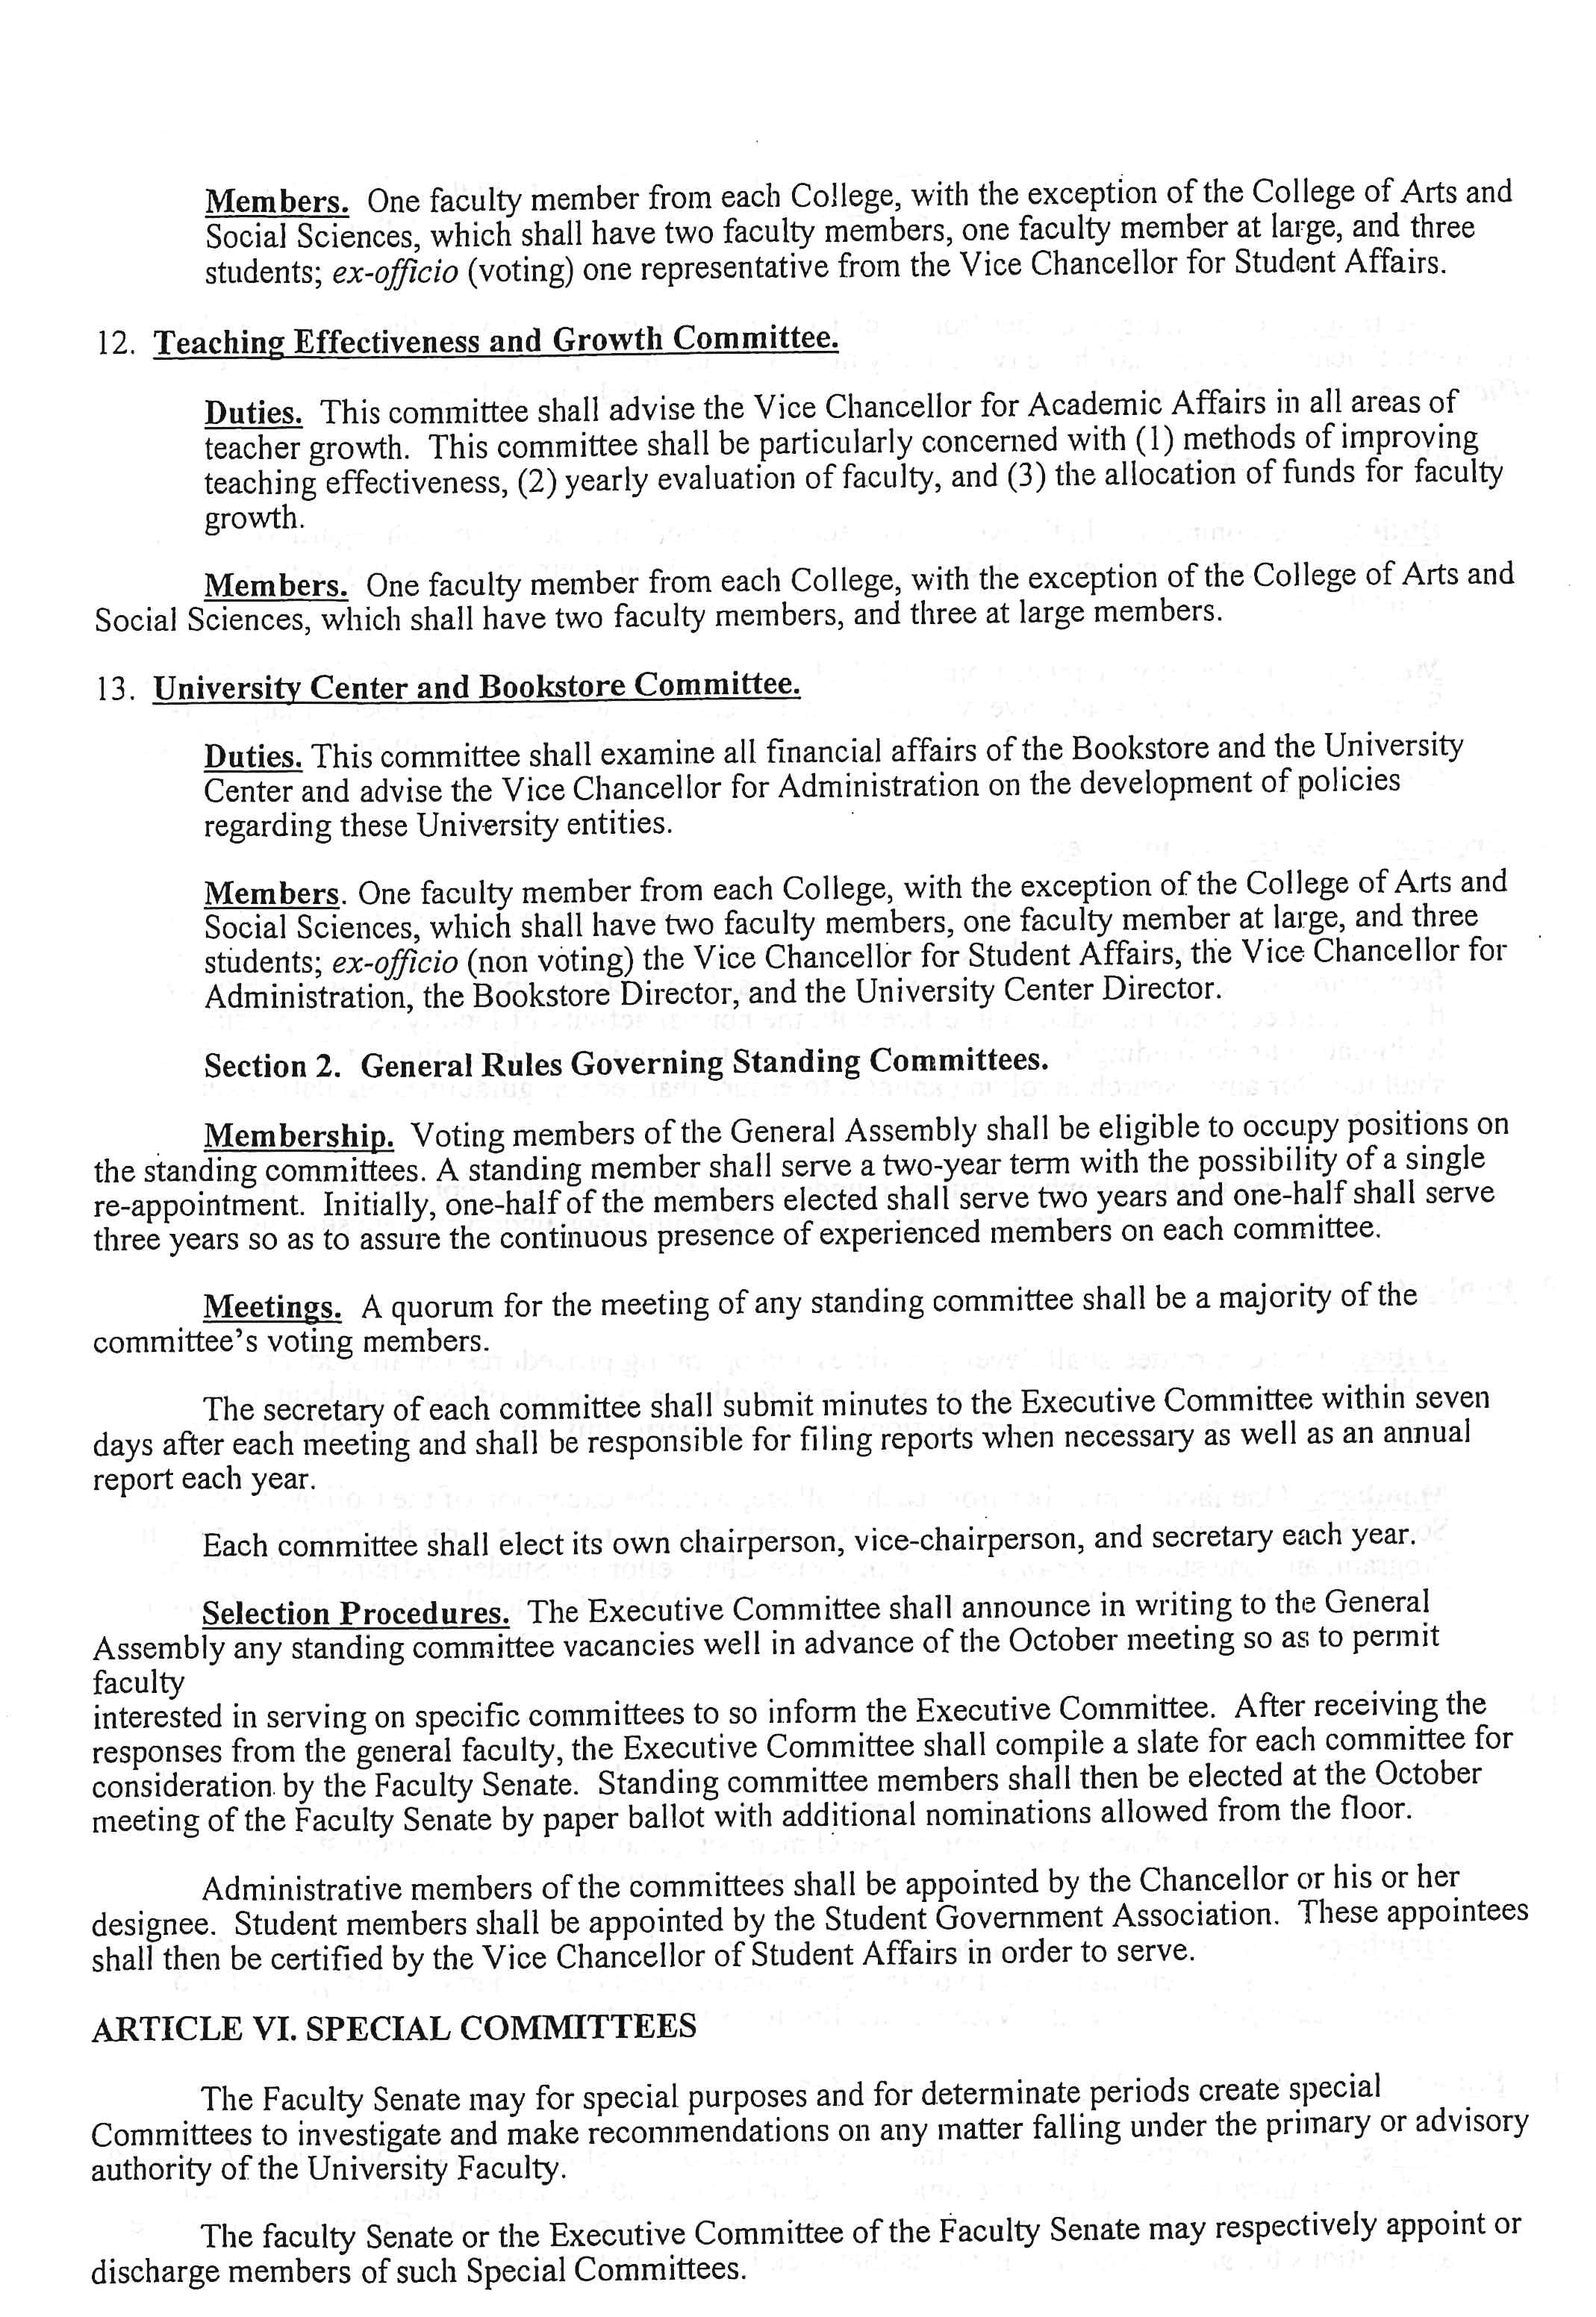 Constitution and Bylaws - Page 8